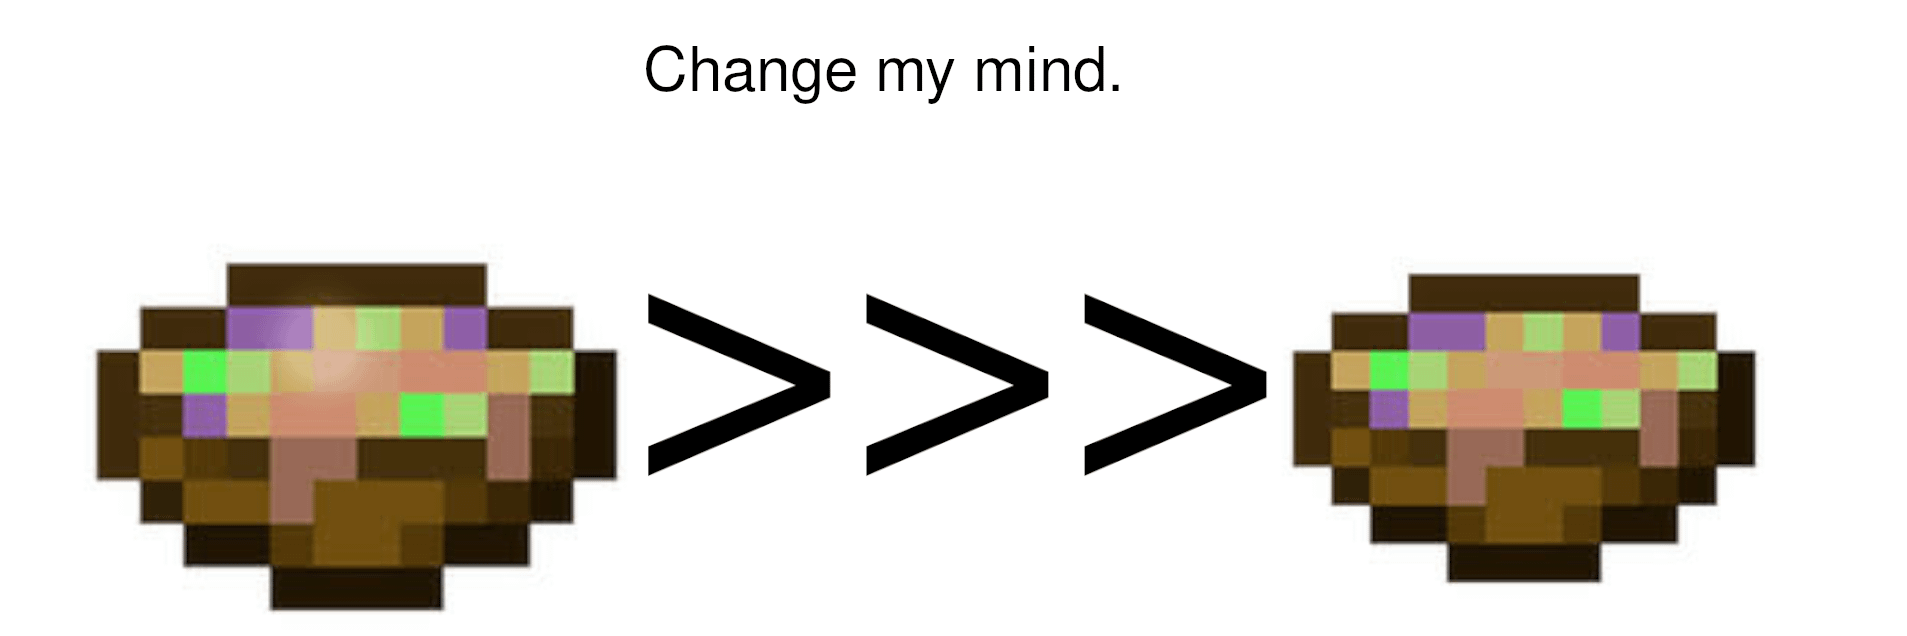 Minecraft Memes - "Change my mind... if you can"